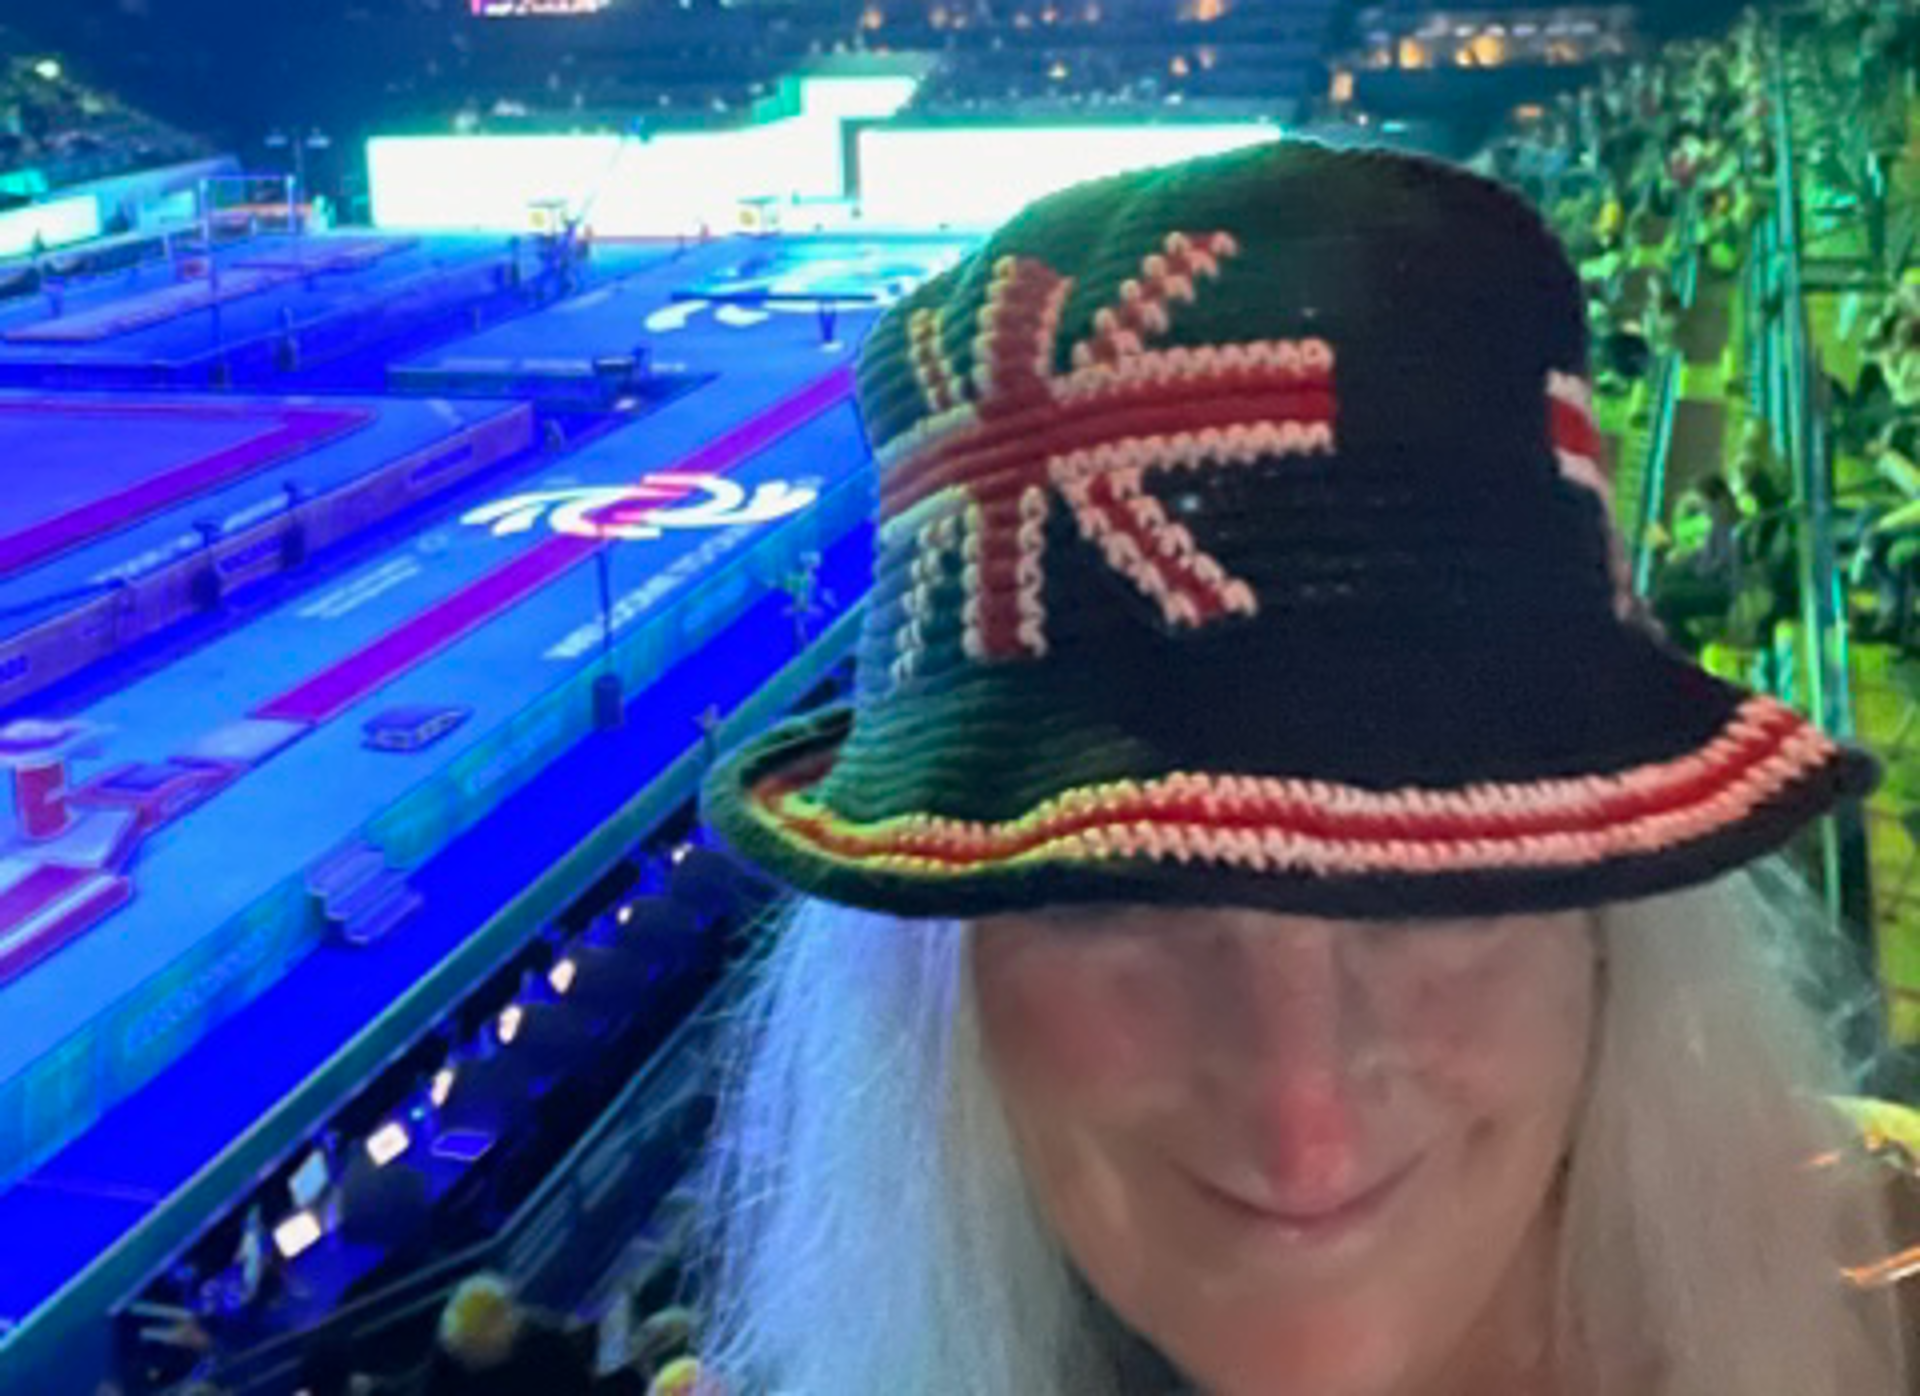 A volunteer wearing a crochet hat featuring the GB flag